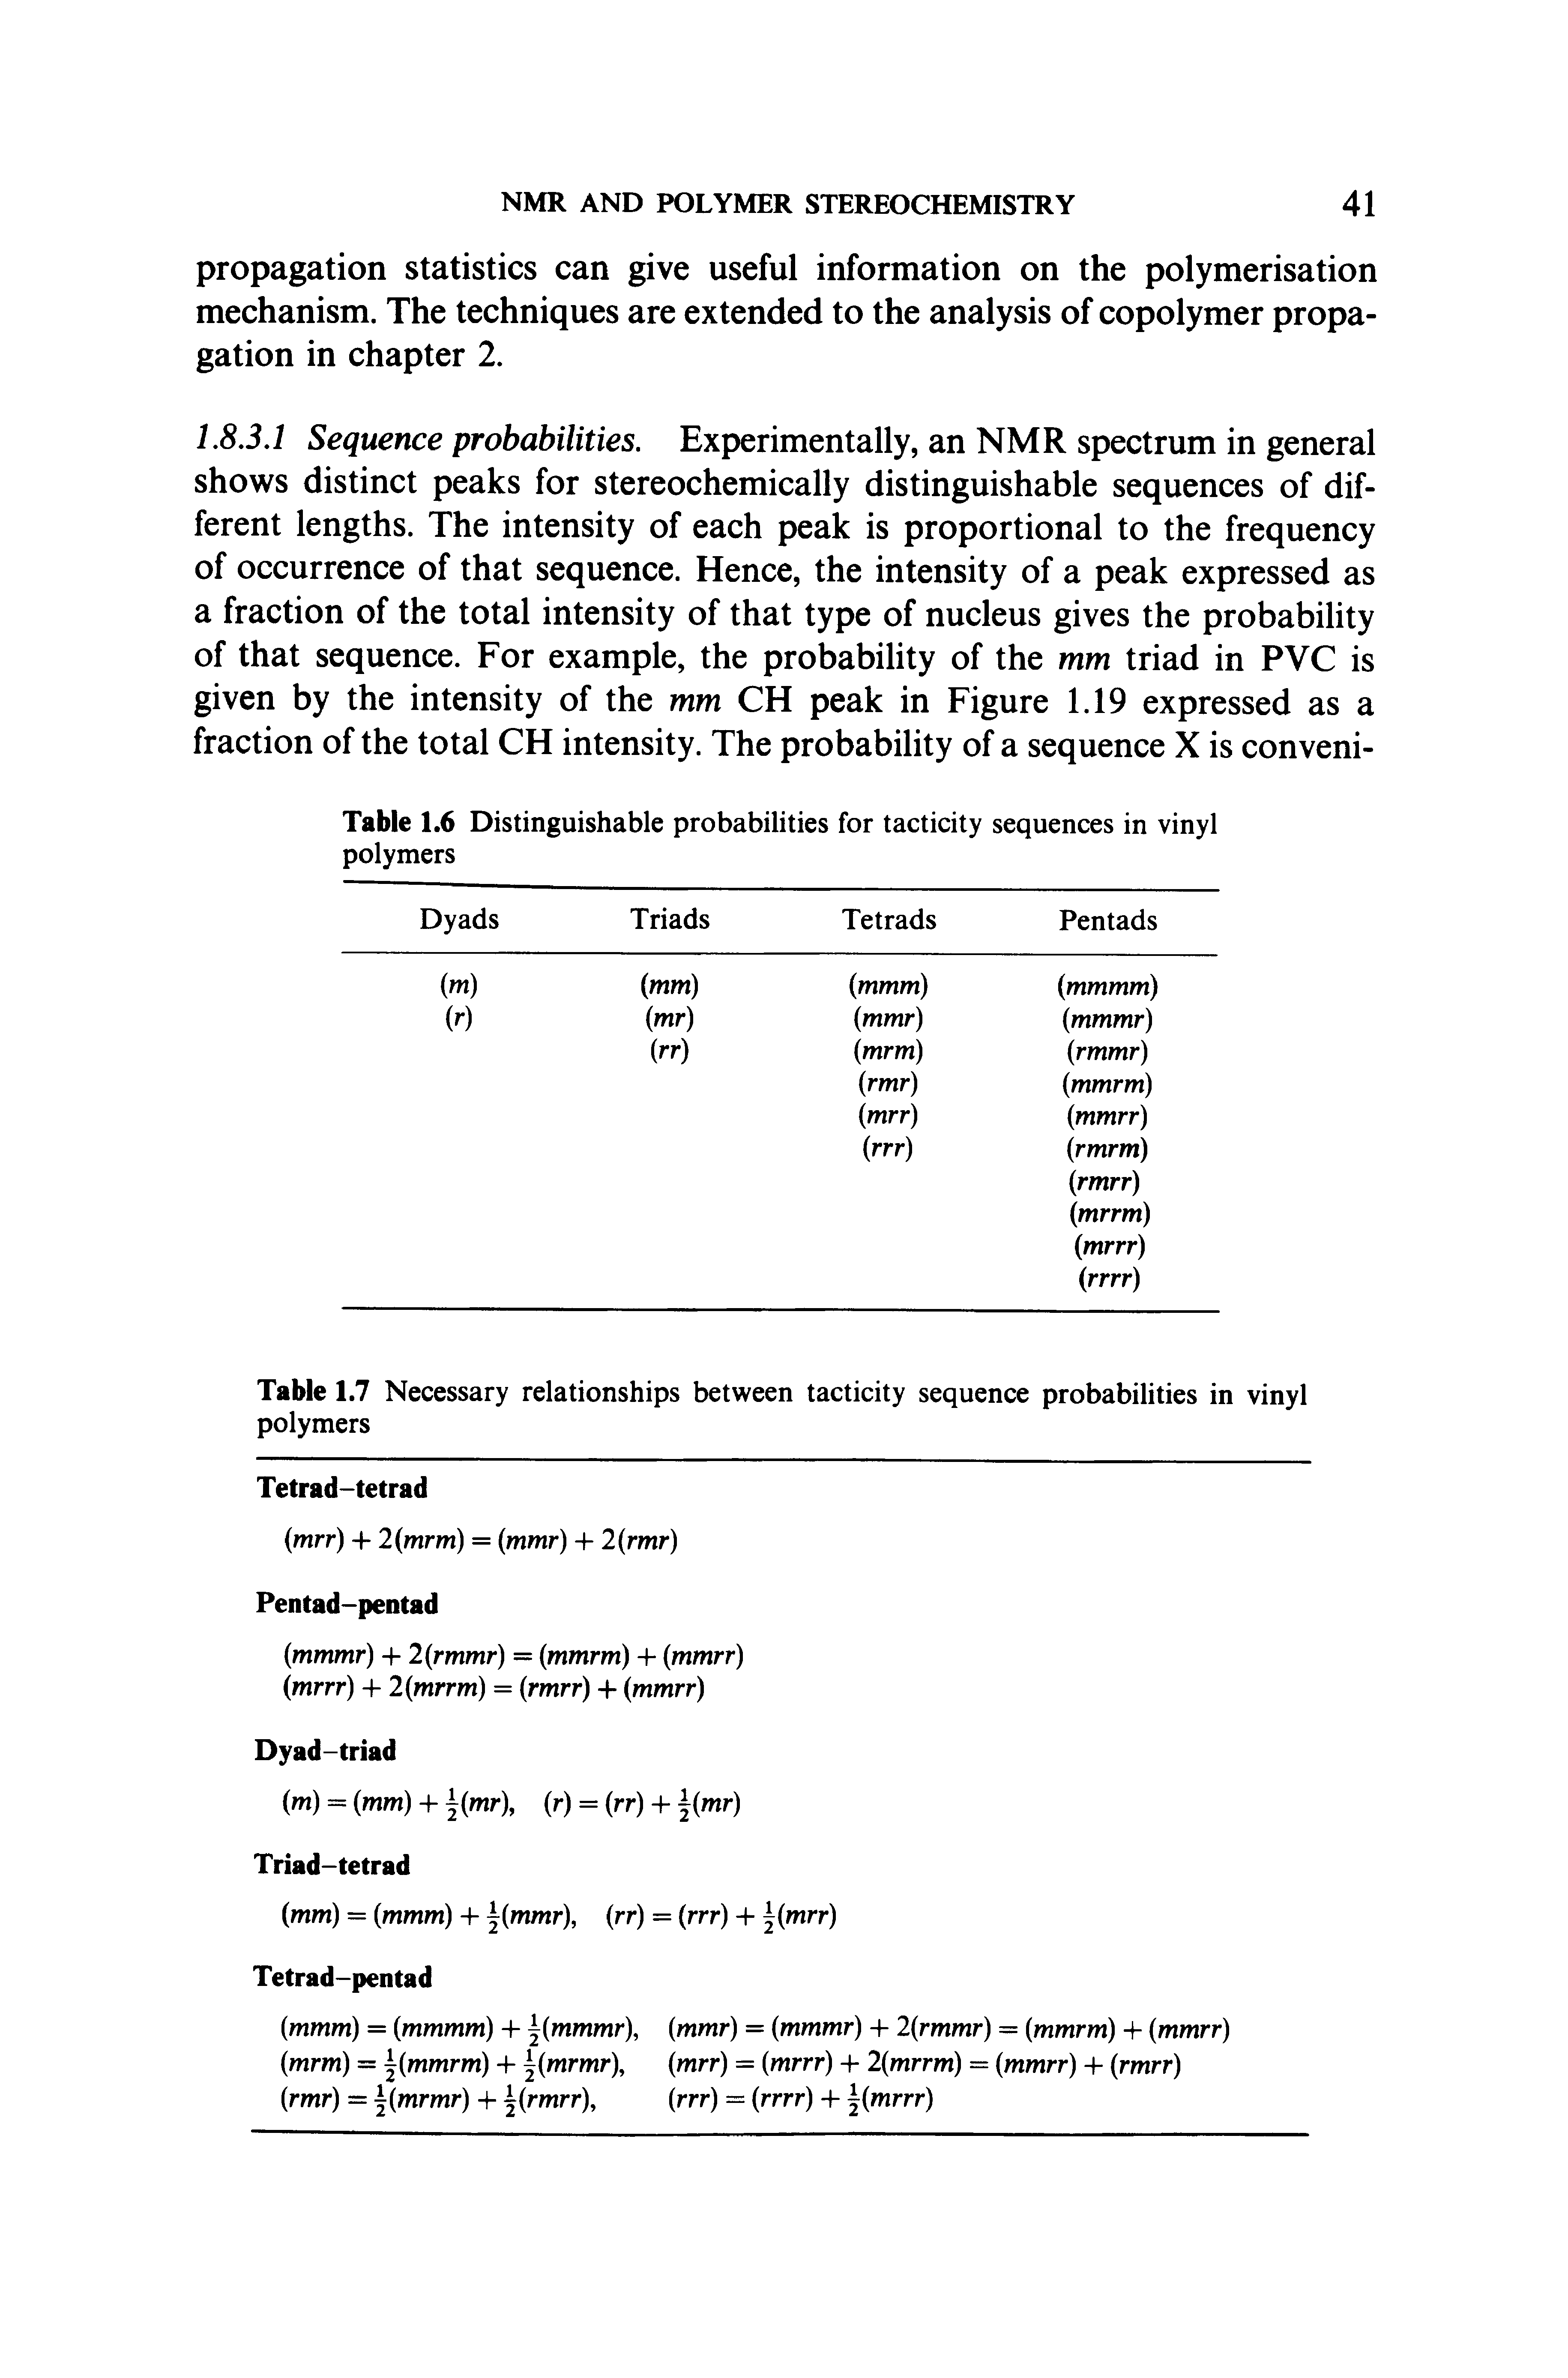 Table 1.6 Distinguishable probabilities for tacticity sequences in vinyl...